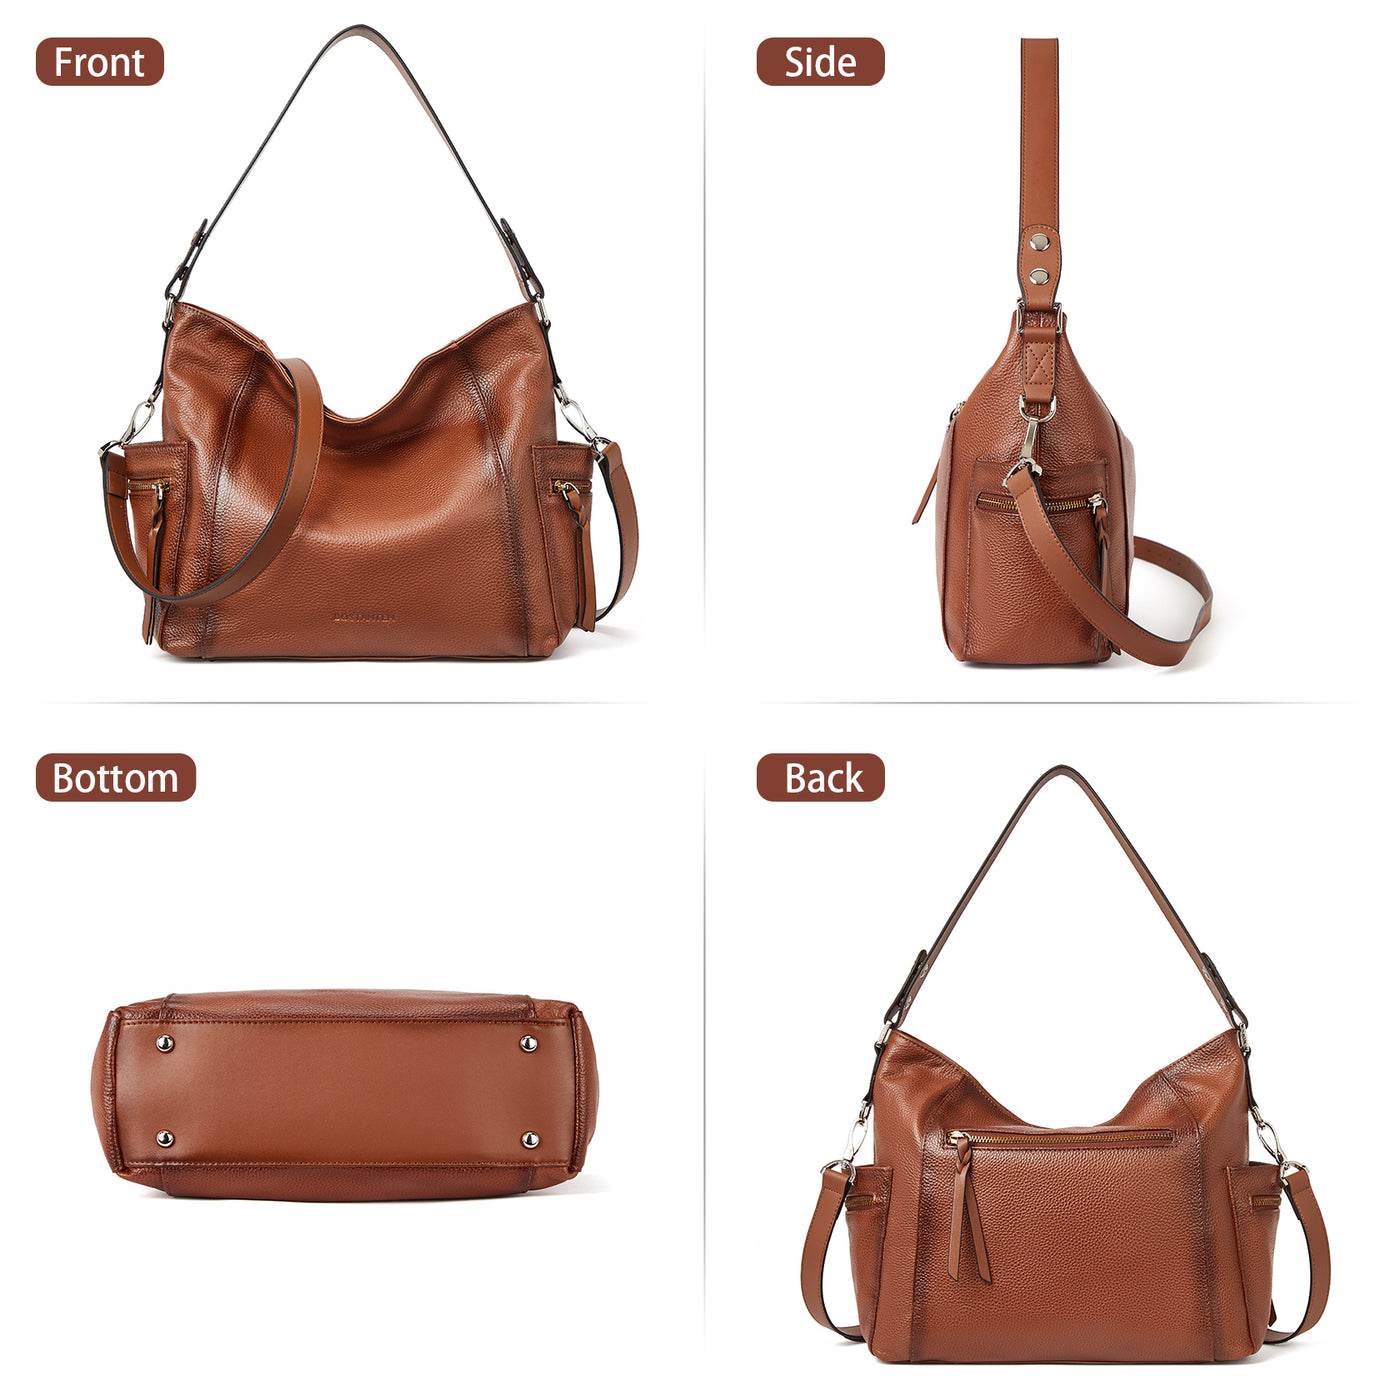 Kweli Genuine Leather Hobo Purses - Quality and Style in One